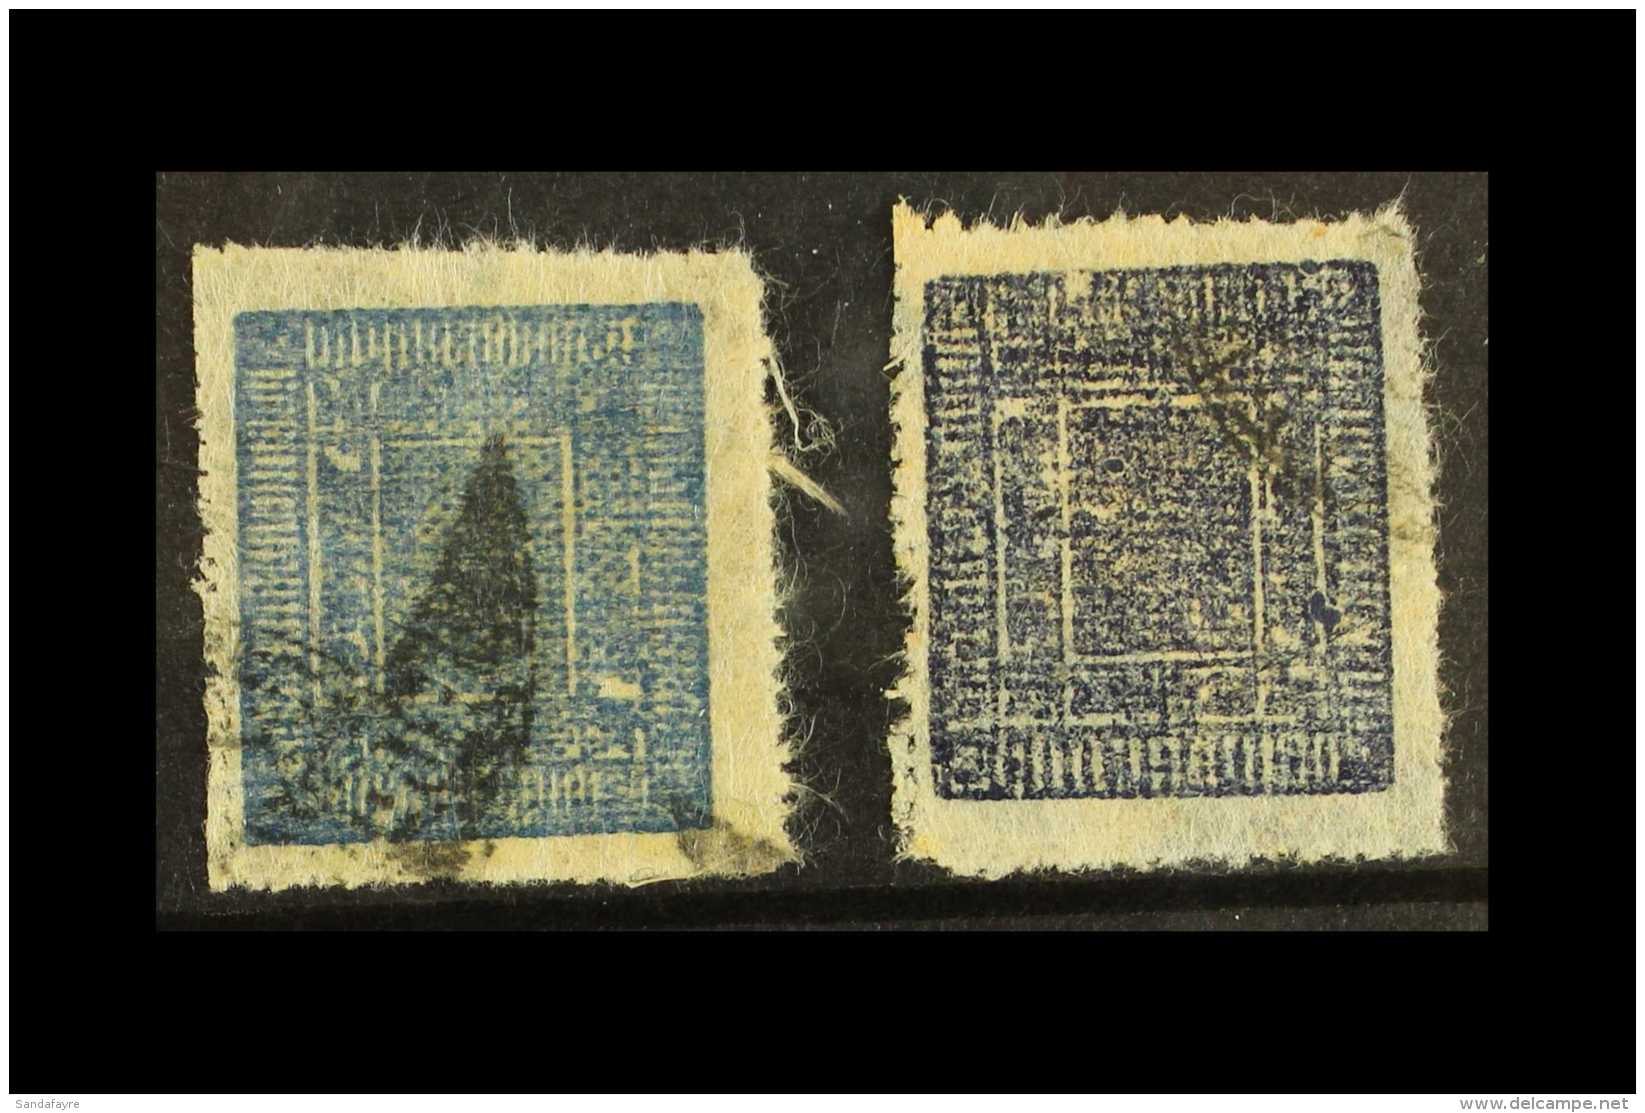 1901-17 1a Blue And 1a Ultramarine On Native Paper, Type II, Pin-perf, SG 28/29, Used. (2 Stamps)  For More... - Nepal